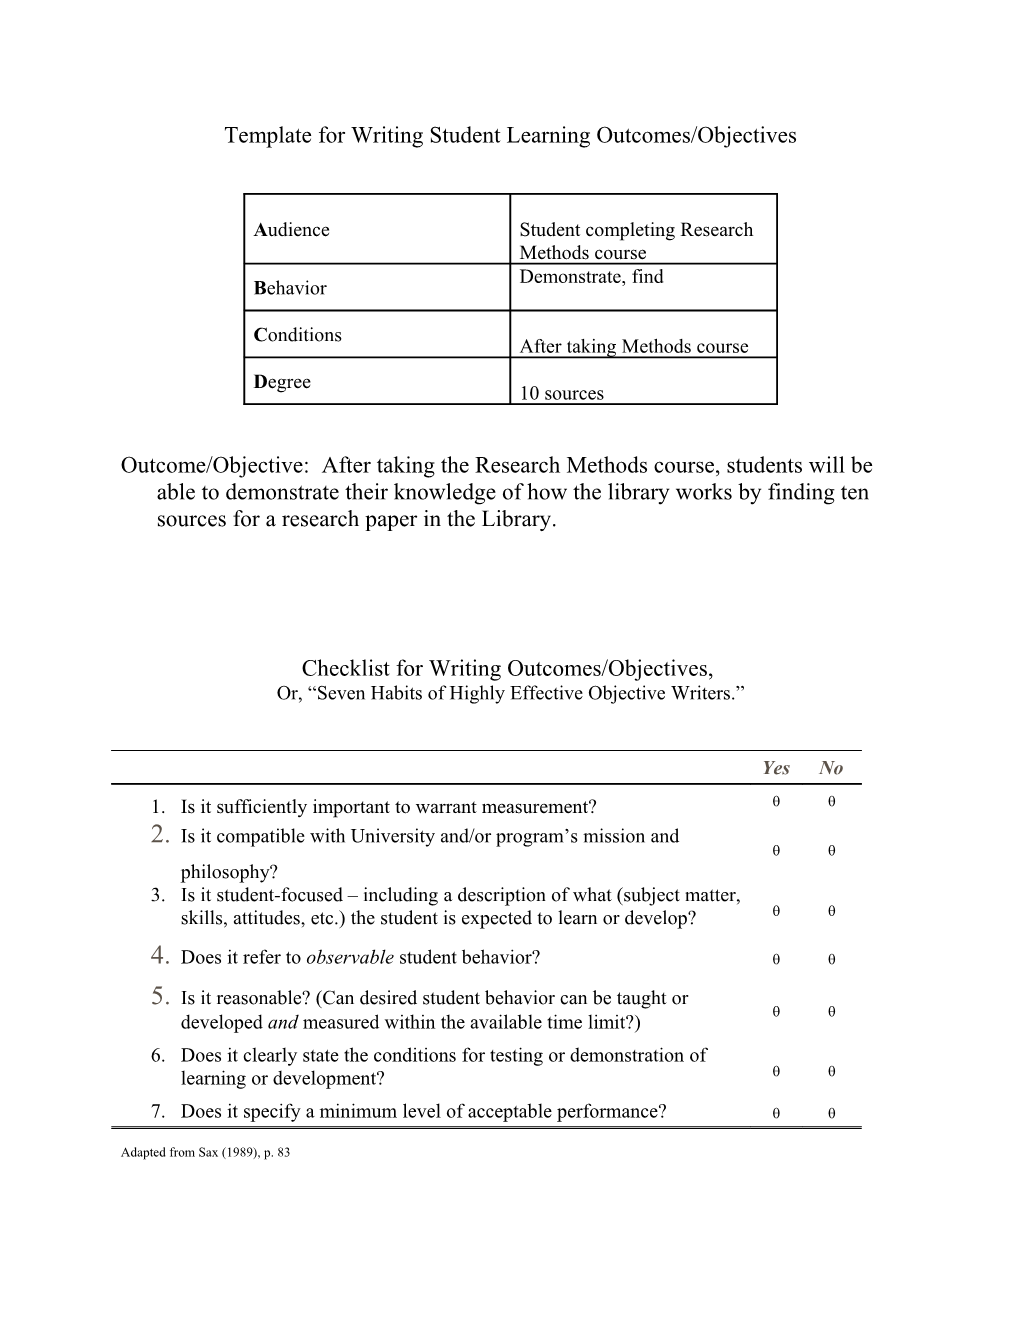 Checklist for Writing Objectives